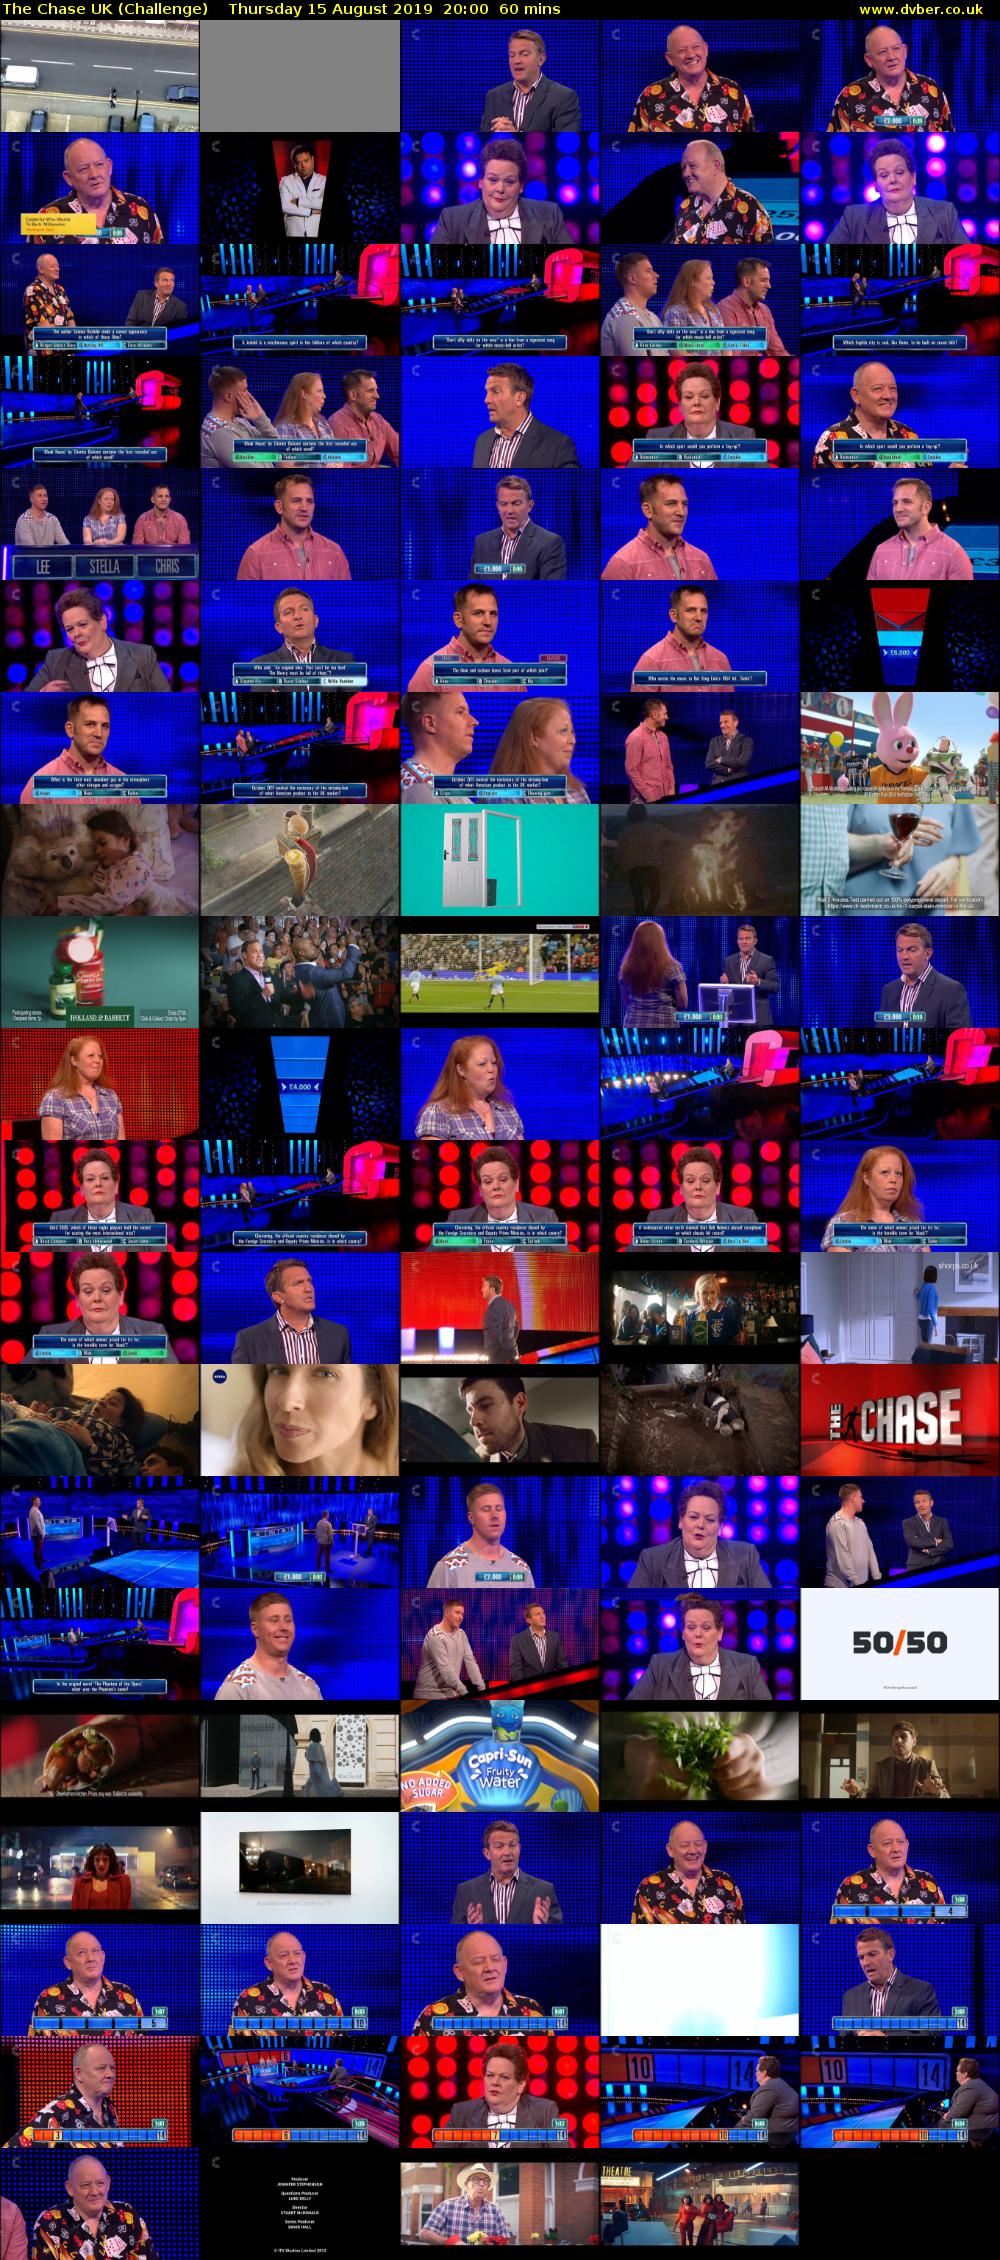 The Chase UK (Challenge) Thursday 15 August 2019 20:00 - 21:00